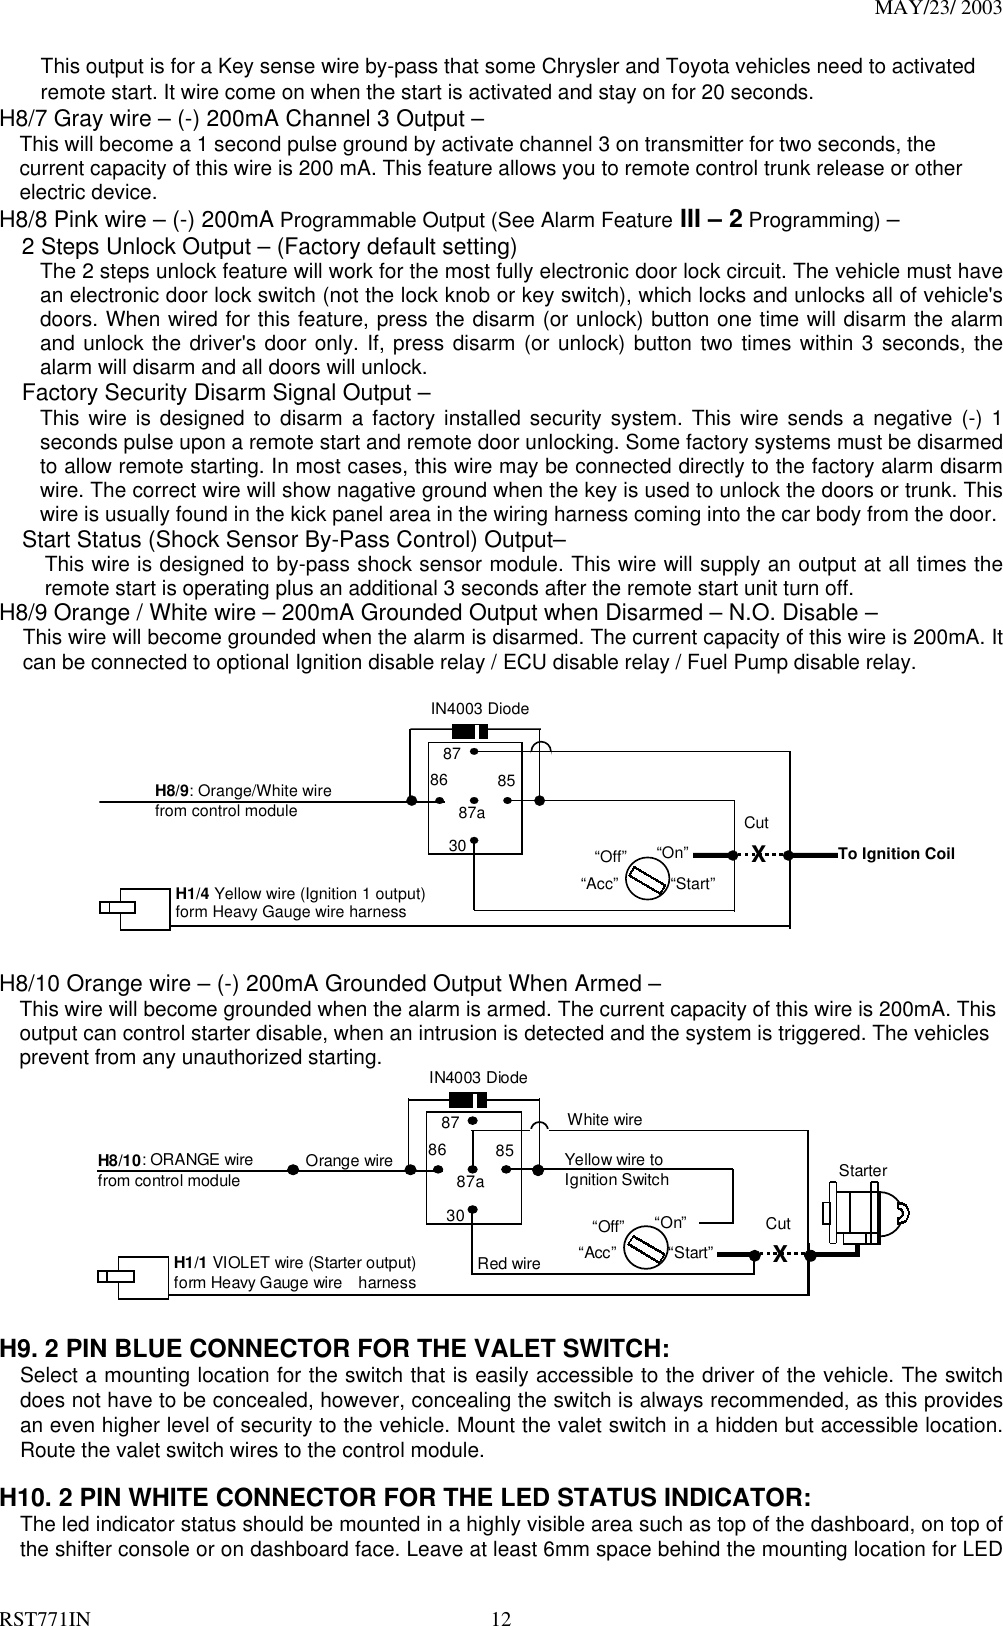 MAY/23/ 2003 RST771IN  12 This output is for a Key sense wire by-pass that some Chrysler and Toyota vehicles need to activated remote start. It wire come on when the start is activated and stay on for 20 seconds. H8/7 Gray wire – (-) 200mA Channel 3 Output – This will become a 1 second pulse ground by activate channel 3 on transmitter for two seconds, the current capacity of this wire is 200 mA. This feature allows you to remote control trunk release or other electric device.   H8/8 Pink wire – (-) 200mA Programmable Output (See Alarm Feature III – 2 Programming) –     2 Steps Unlock Output – (Factory default setting) The 2 steps unlock feature will work for the most fully electronic door lock circuit. The vehicle must have an electronic door lock switch (not the lock knob or key switch), which locks and unlocks all of vehicle&apos;s doors. When wired for this feature, press the disarm (or unlock) button one time will disarm the alarm and unlock the driver&apos;s door only. If, press disarm (or unlock) button two times within 3 seconds, the alarm will disarm and all doors will unlock.     Factory Security Disarm Signal Output – This wire is designed to disarm a factory installed security system. This wire sends a negative (-) 1 seconds pulse upon a remote start and remote door unlocking. Some factory systems must be disarmed to allow remote starting. In most cases, this wire may be connected directly to the factory alarm disarm wire. The correct wire will show nagative ground when the key is used to unlock the doors or trunk. This wire is usually found in the kick panel area in the wiring harness coming into the car body from the door. Start Status (Shock Sensor By-Pass Control) Output–   This wire is designed to by-pass shock sensor module. This wire will supply an output at all times the remote start is operating plus an additional 3 seconds after the remote start unit turn off. H8/9 Orange / White wire – 200mA Grounded Output when Disarmed – N.O. Disable – This wire will become grounded when the alarm is disarmed. The current capacity of this wire is 200mA. It can be connected to optional Ignition disable relay / ECU disable relay / Fuel Pump disable relay.   87 87a 85 30 86 IN4003 Diode H8/9: Orange/White wire   from control module “Start” “On”  X Cut “Acc” “Off” H1/4 Yellow wire (Ignition 1 output)   form Heavy Gauge wire harness To Ignition Coil   H8/10 Orange wire – (-) 200mA Grounded Output When Armed – This wire will become grounded when the alarm is armed. The current capacity of this wire is 200mA. This output can control starter disable, when an intrusion is detected and the system is triggered. The vehicles prevent from any unauthorized starting.   8787a853086IN4003 DiodeH8/10: ORANGE wirefrom control module“Start”“On”White wireXCutRed wireOrange wire“Acc”“Off”StarterH1/1 VIOLET wire (Starter output)form Heavy Gauge wire    harnessYellow wire toIgnition Switch  H9. 2 PIN BLUE CONNECTOR FOR THE VALET SWITCH: Select a mounting location for the switch that is easily accessible to the driver of the vehicle. The switch does not have to be concealed, however, concealing the switch is always recommended, as this provides an even higher level of security to the vehicle. Mount the valet switch in a hidden but accessible location. Route the valet switch wires to the control module.  H10. 2 PIN WHITE CONNECTOR FOR THE LED STATUS INDICATOR: The led indicator status should be mounted in a highly visible area such as top of the dashboard, on top of the shifter console or on dashboard face. Leave at least 6mm space behind the mounting location for LED 